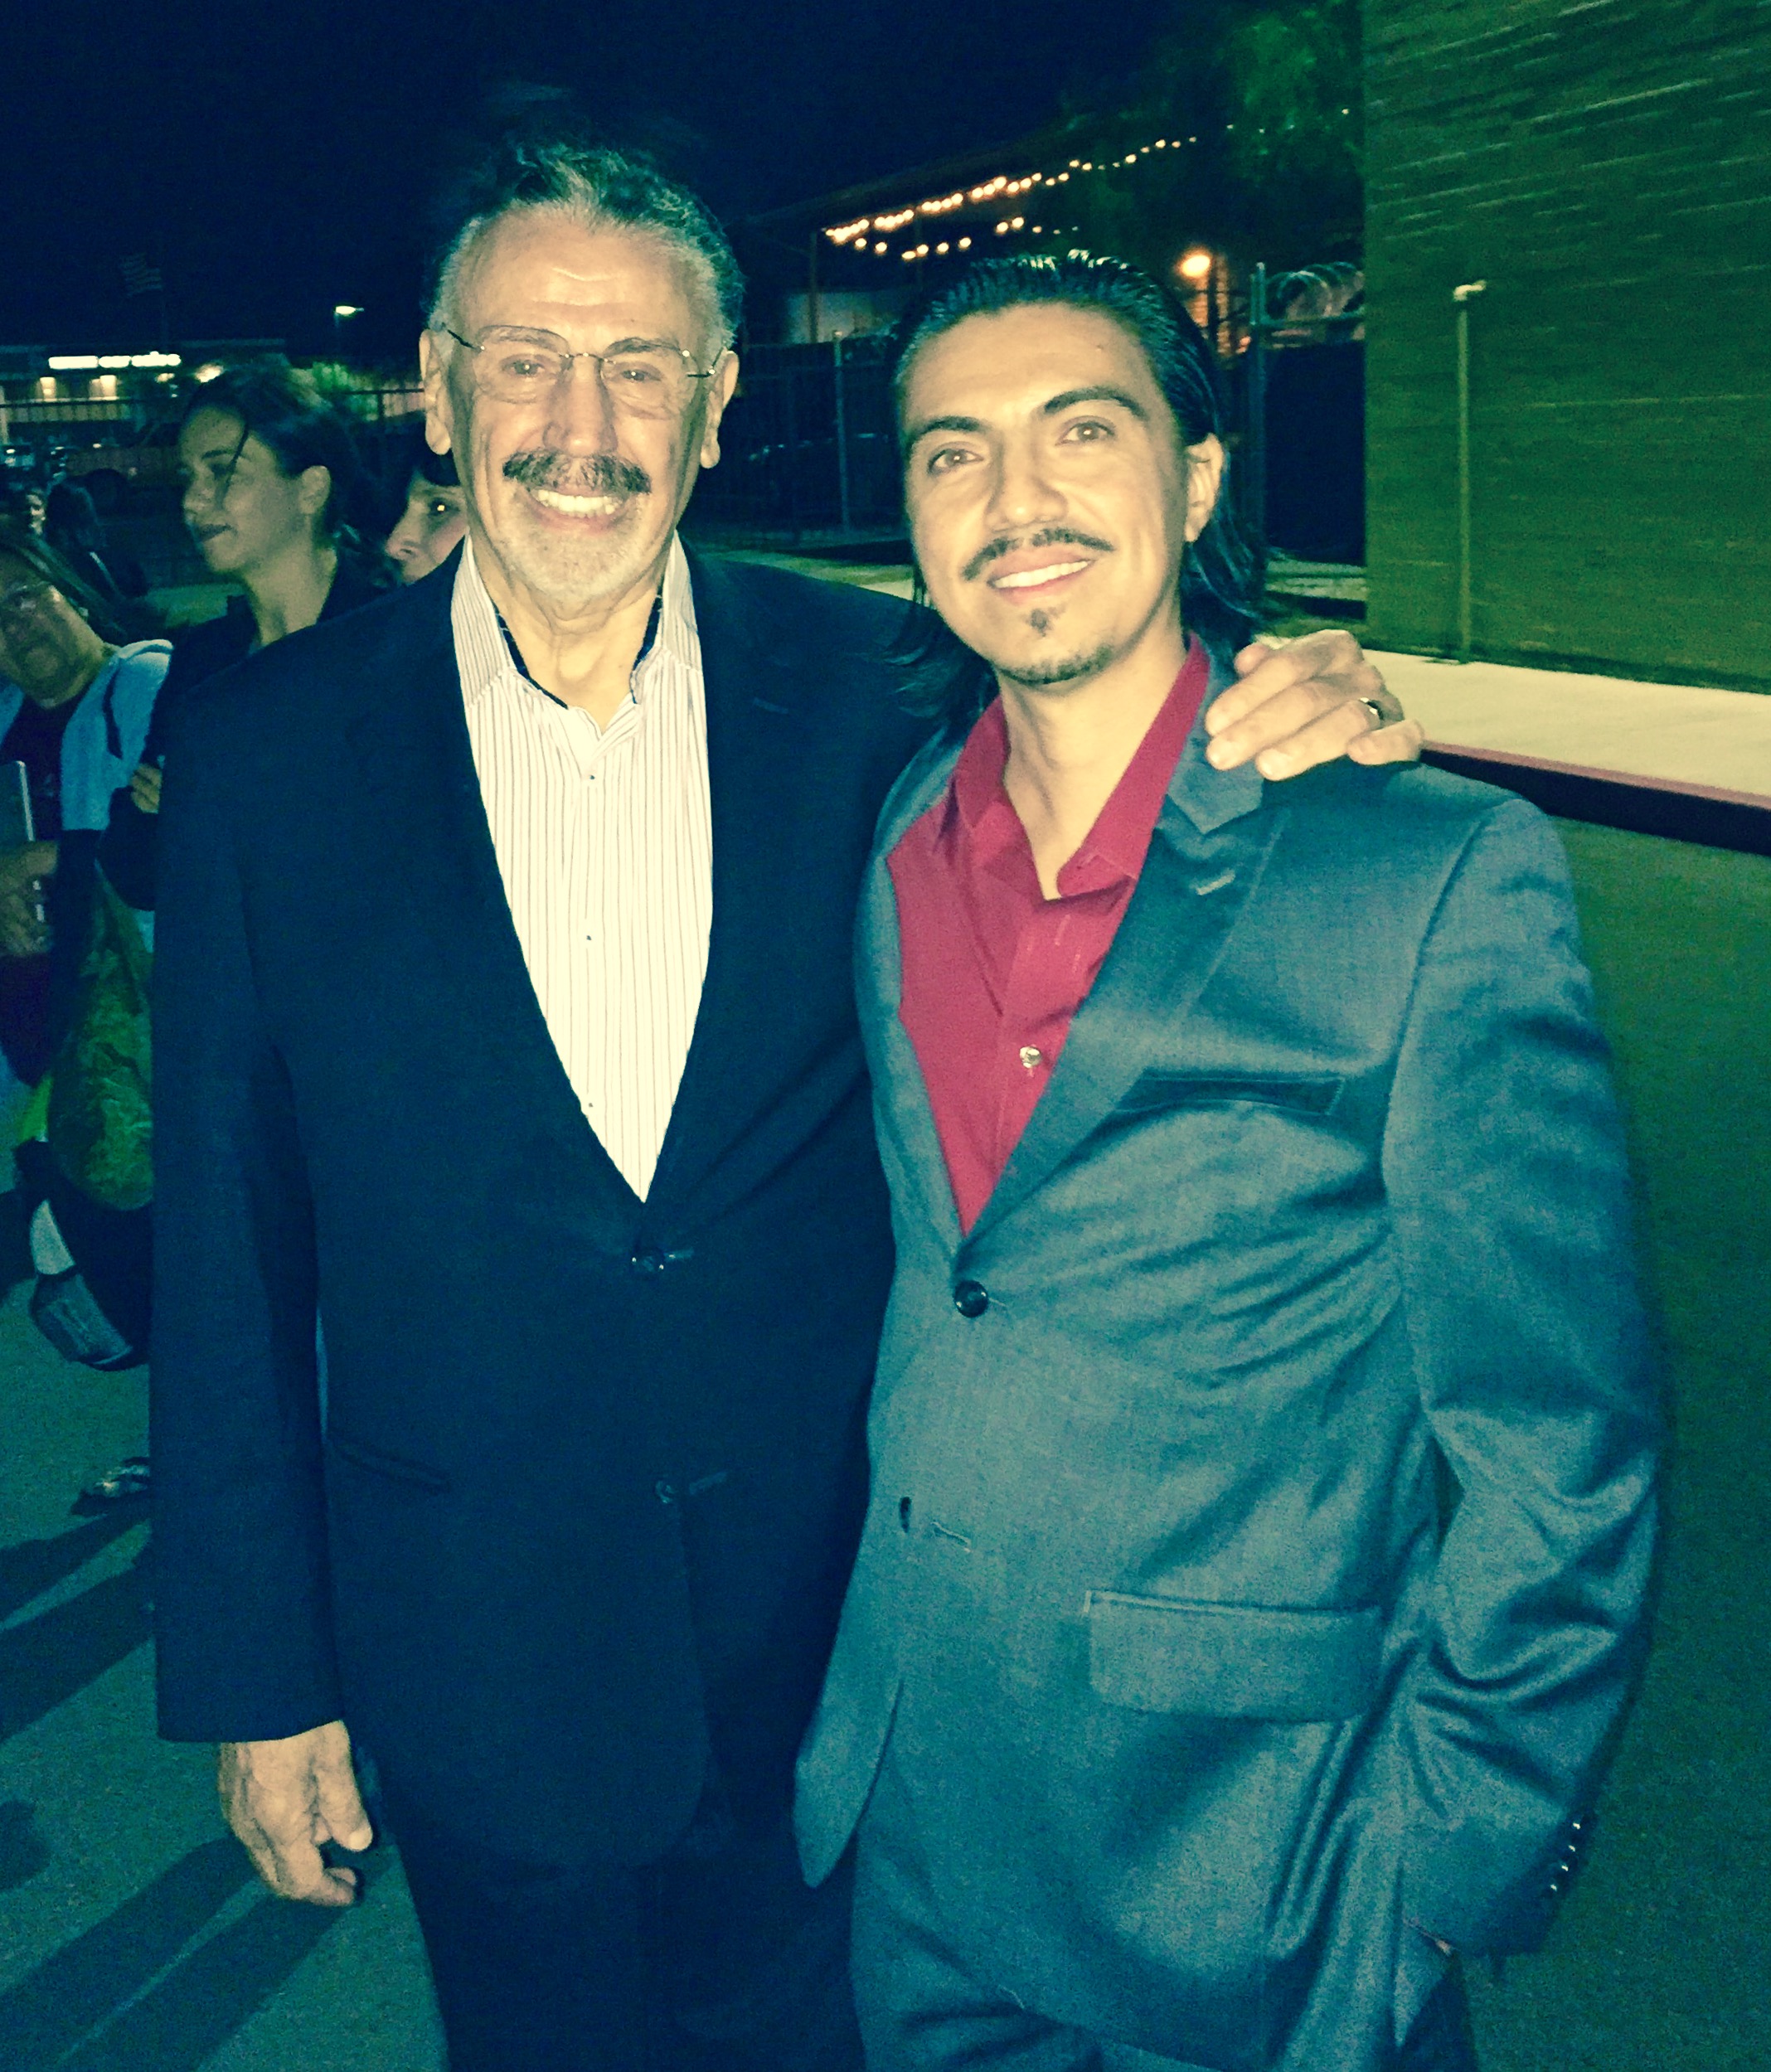 With a great inspiration of mine, the talented actor and director Alfonso Arau.